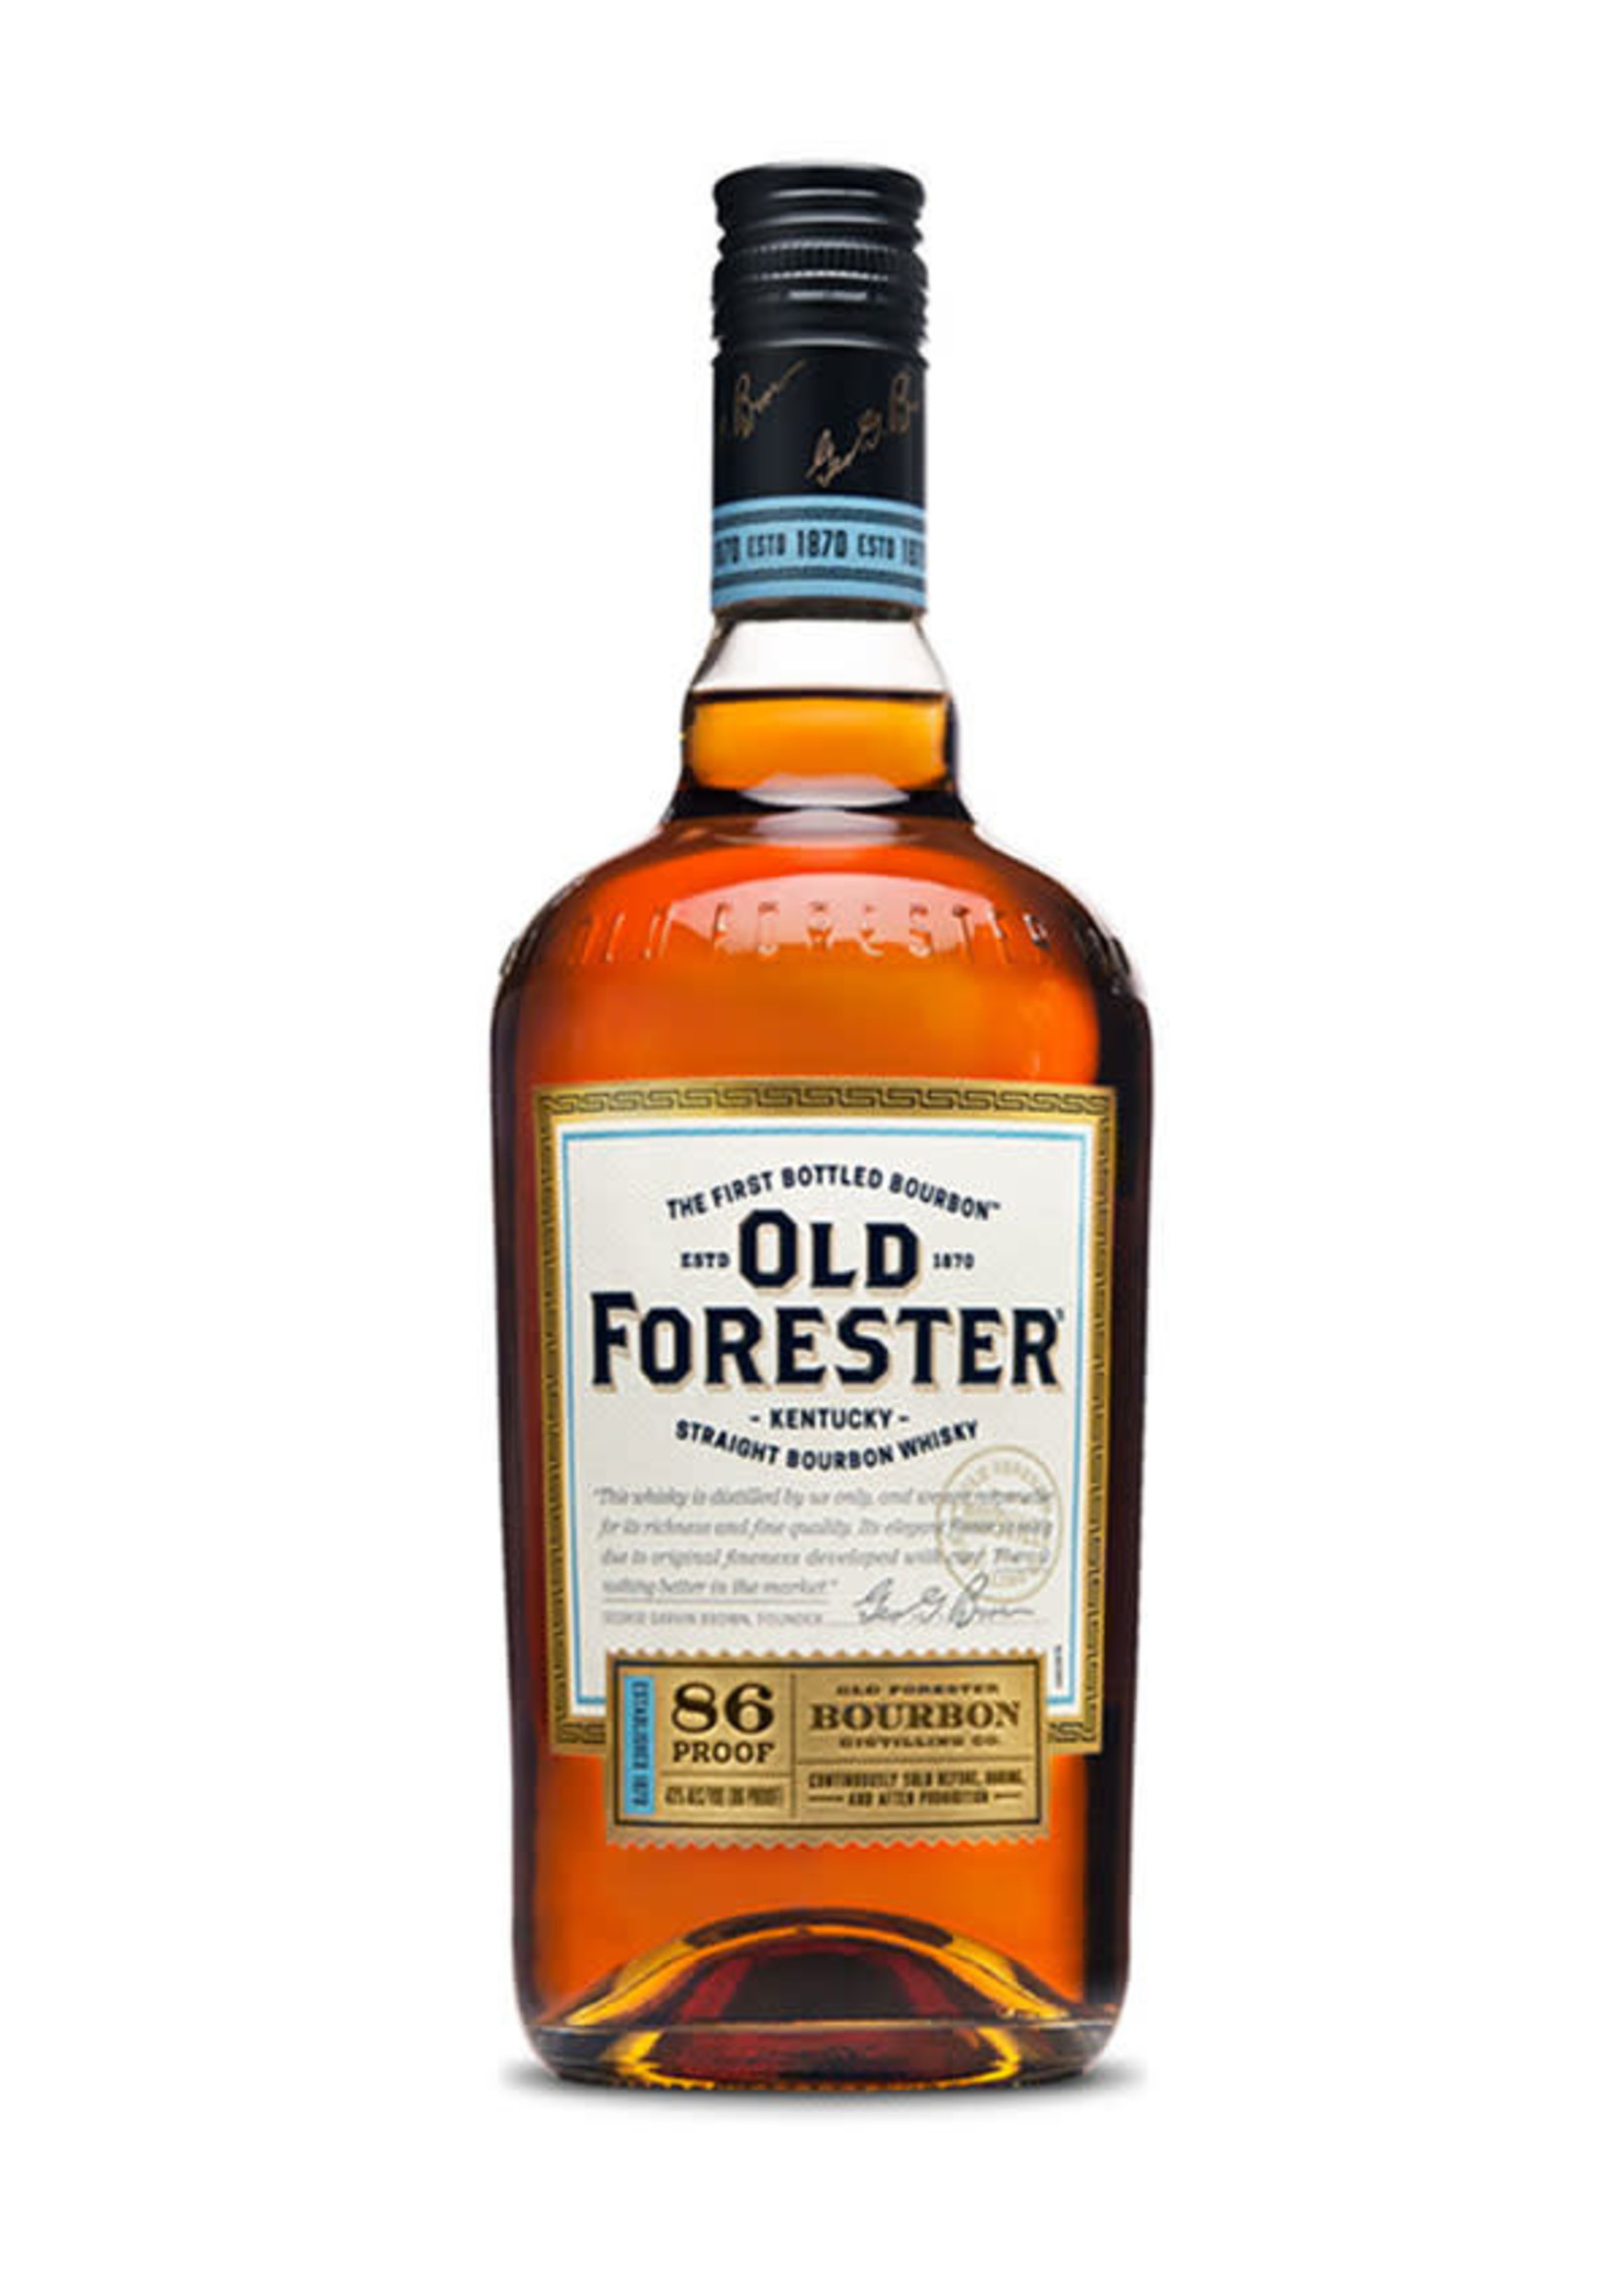 Old Forester Old Forester